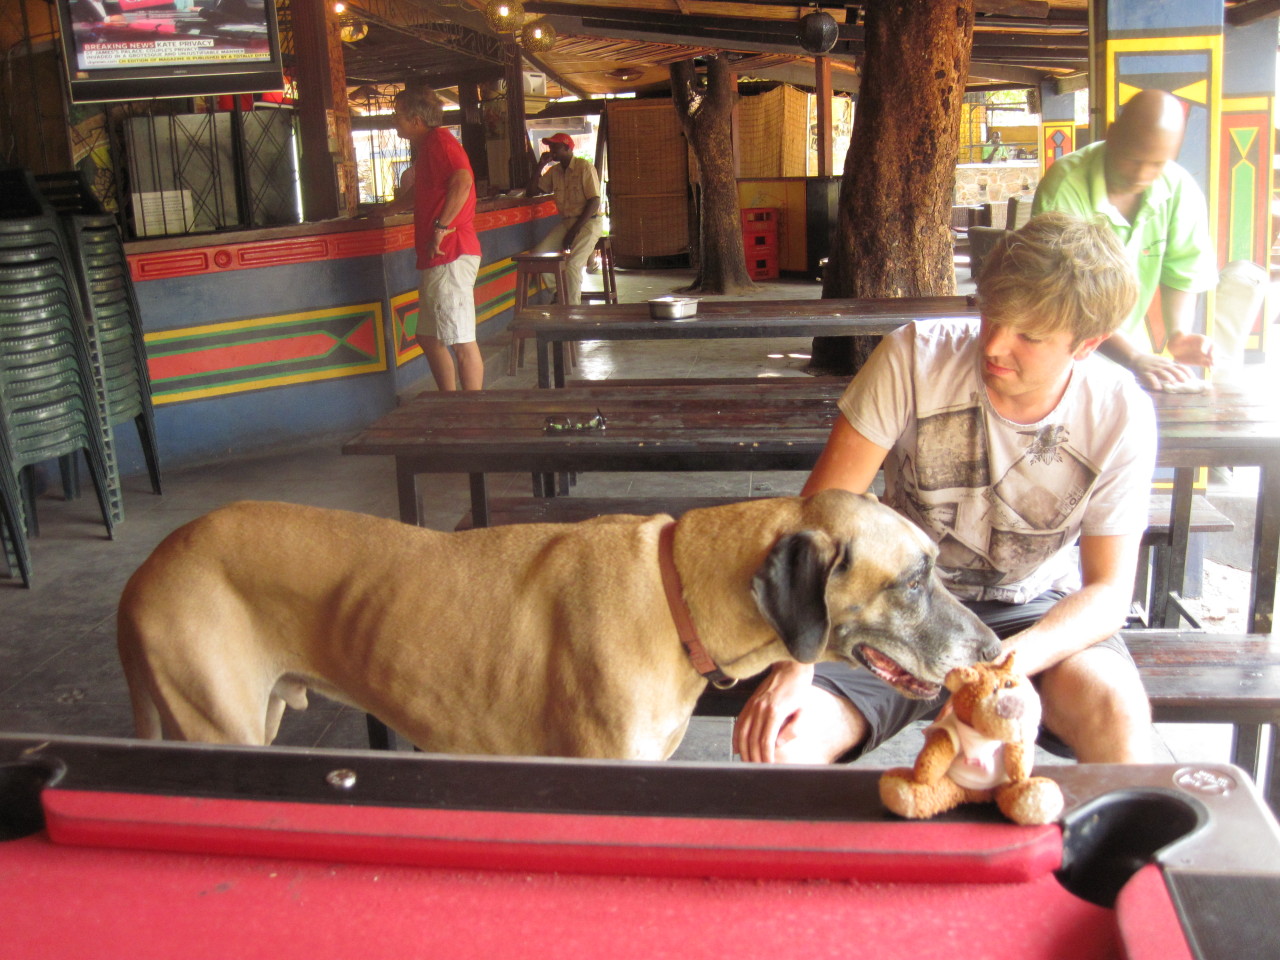 Bearaptu played pool with a large dog in Zimbabwe. Beats being eaten, I guess.